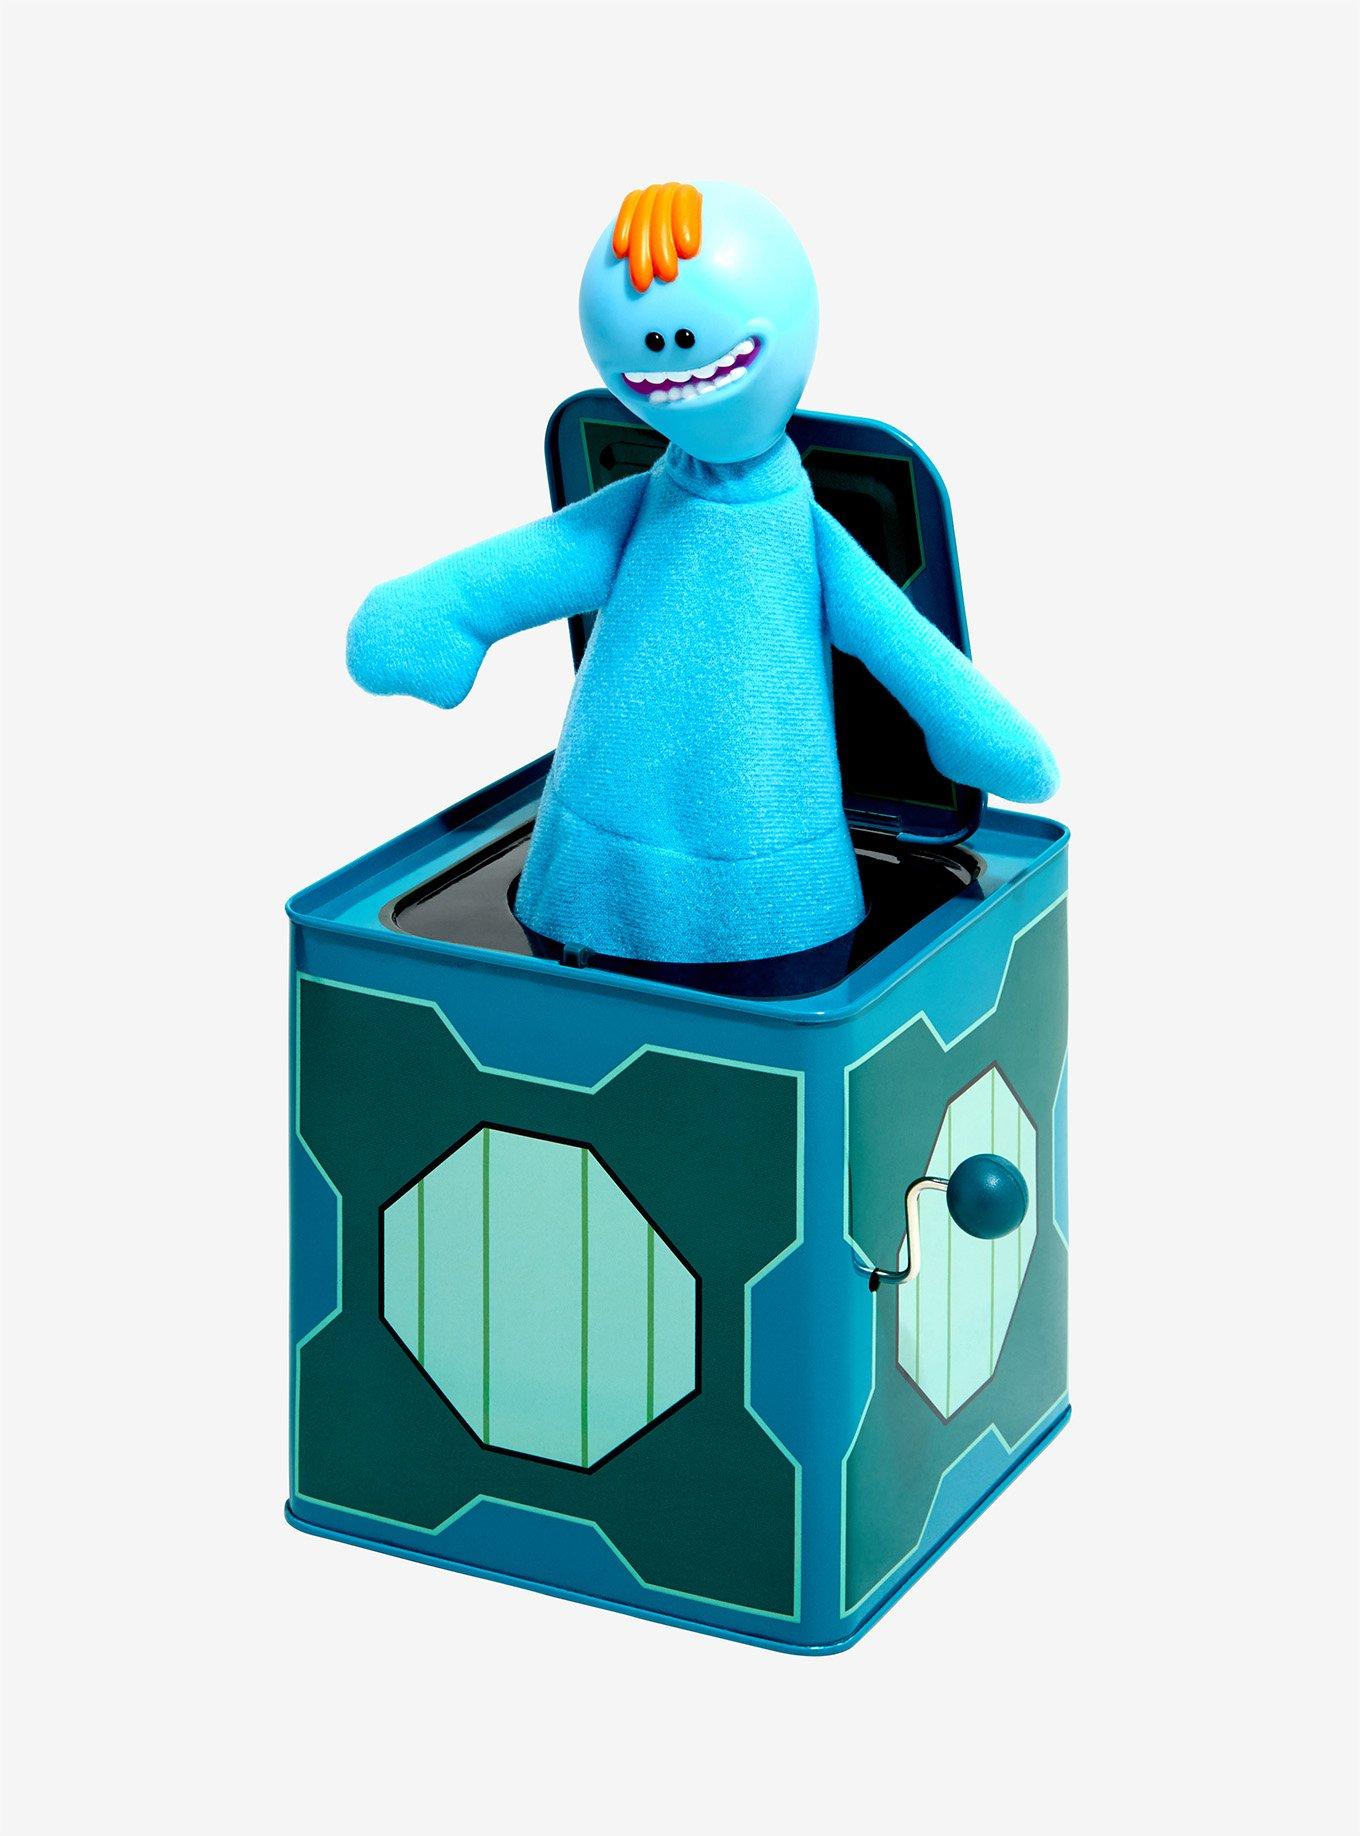 Rick and Morty's Mr. Meeseeks Is a Perfect Jack-in-the-Box